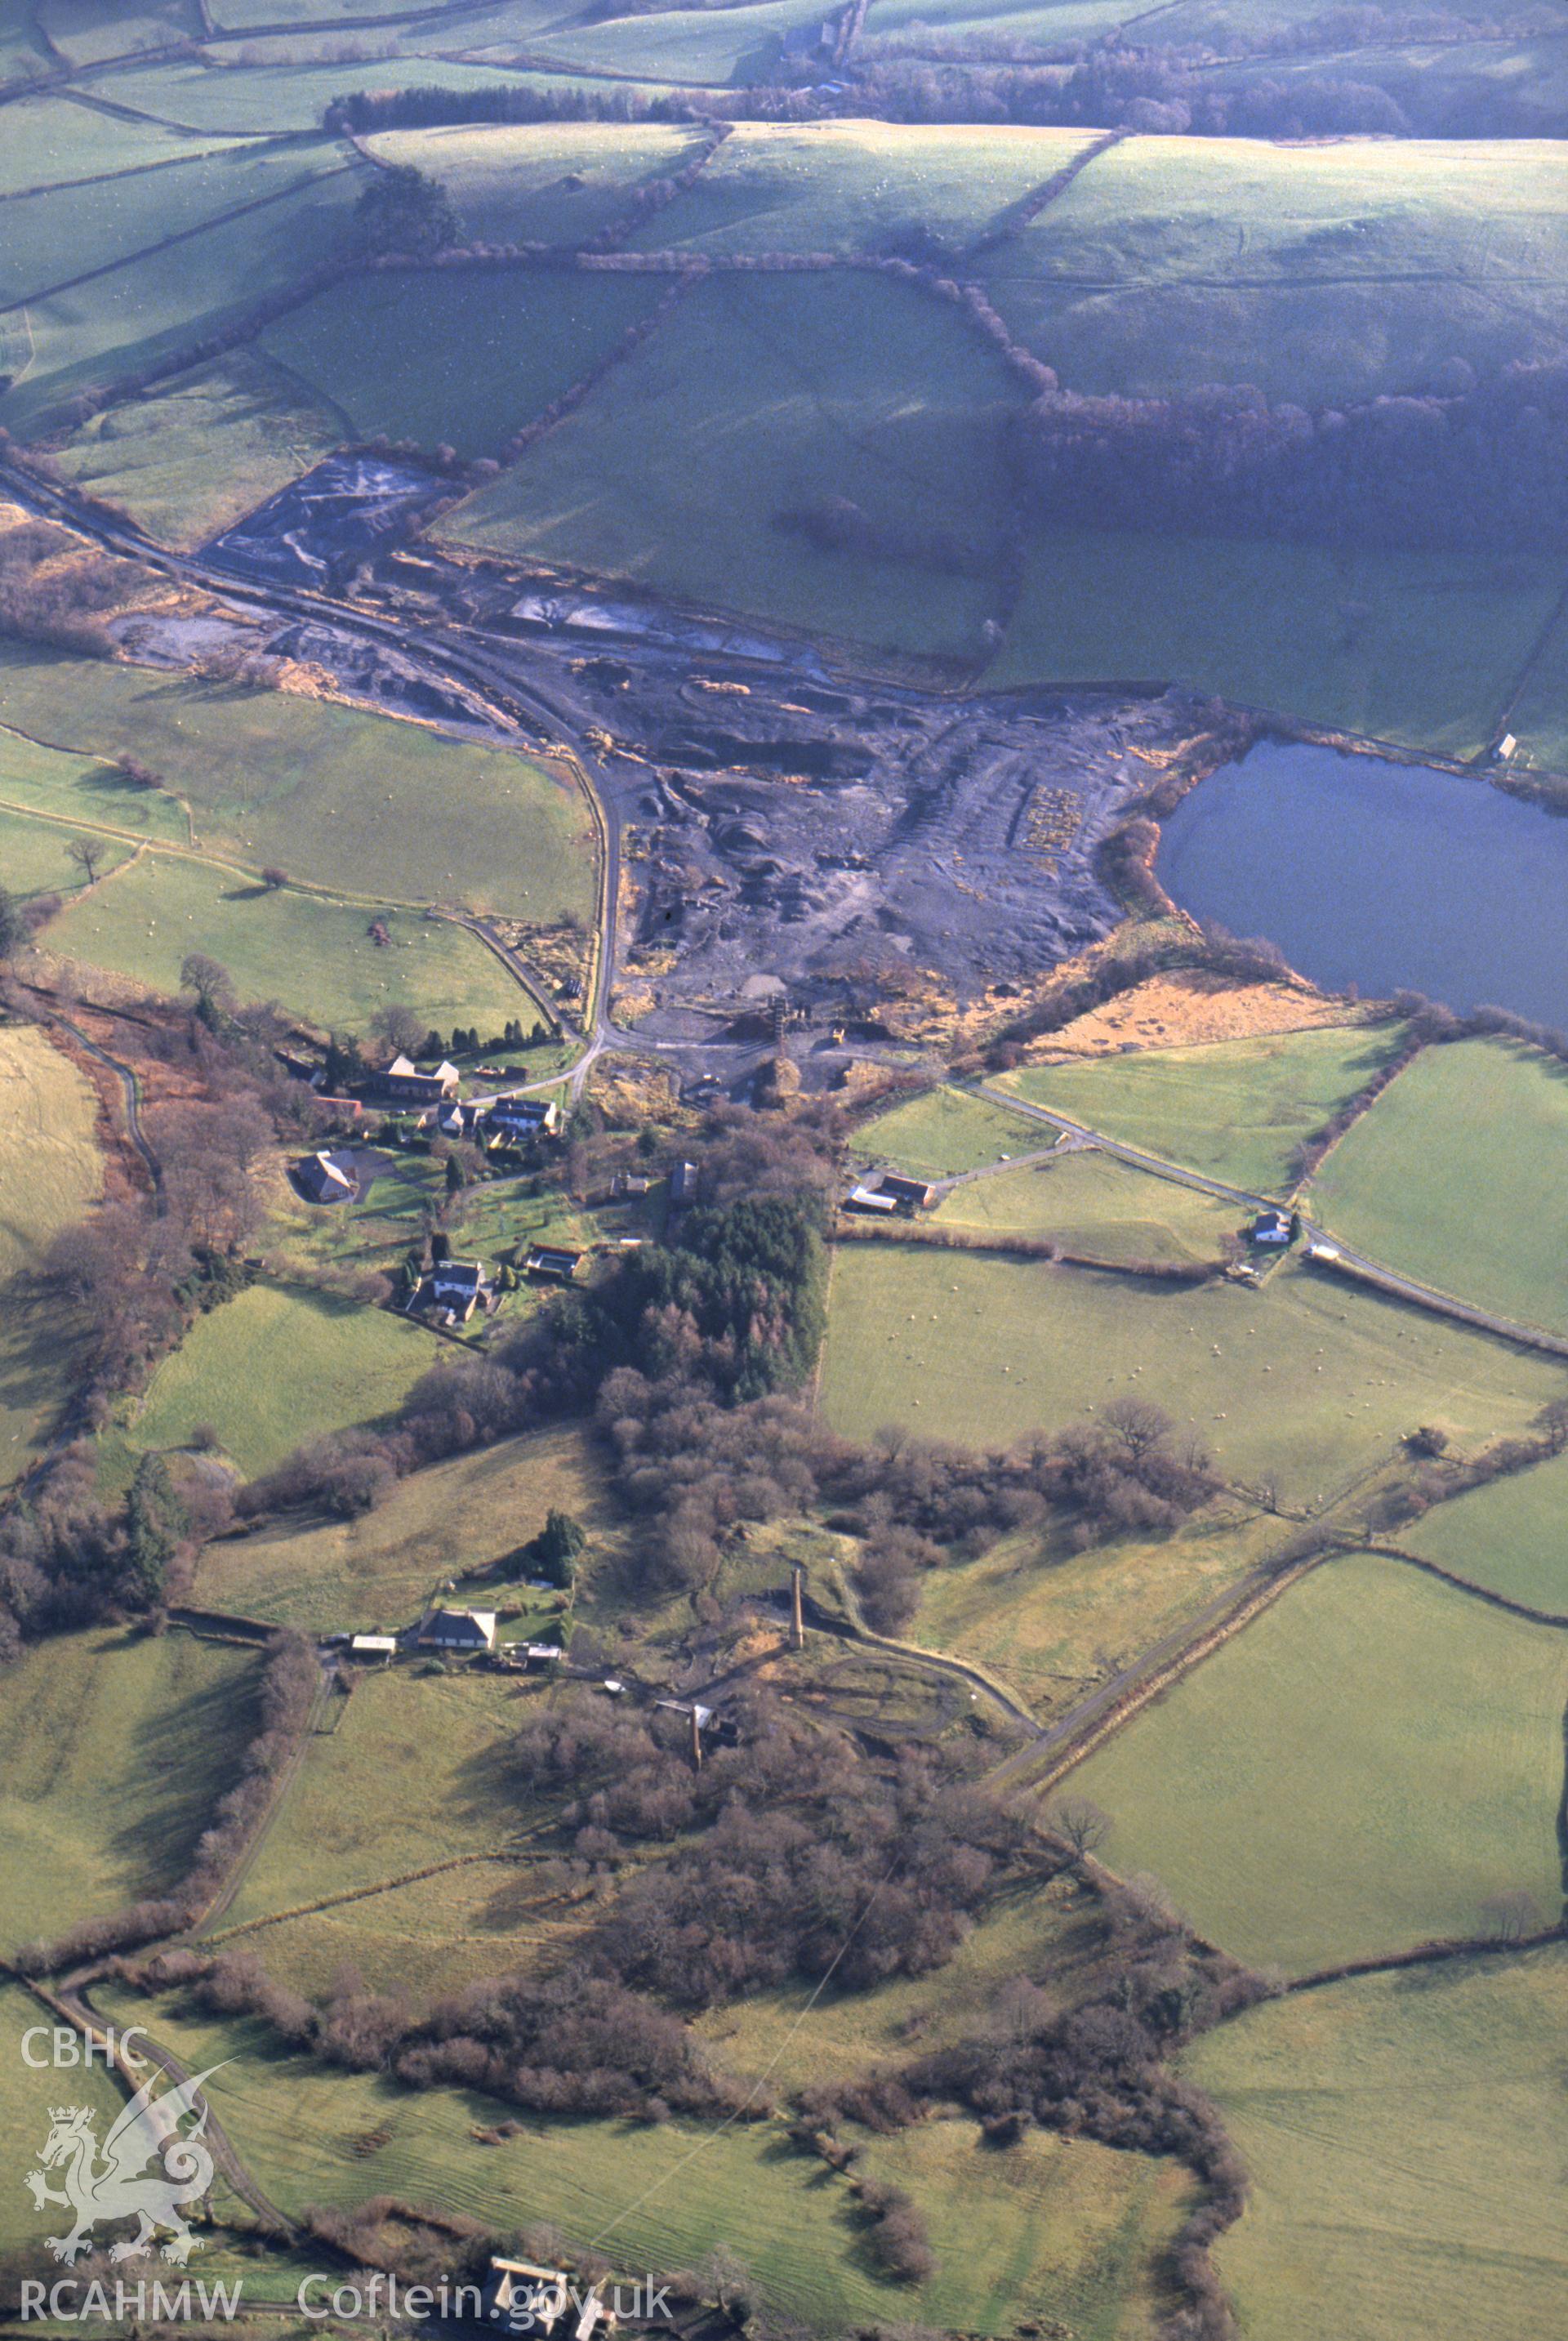 RCAHMW colour slide oblique aerial photograph of Llyn-y-fan, Llanidloes, taken on 08/12/1992 by CR Musson